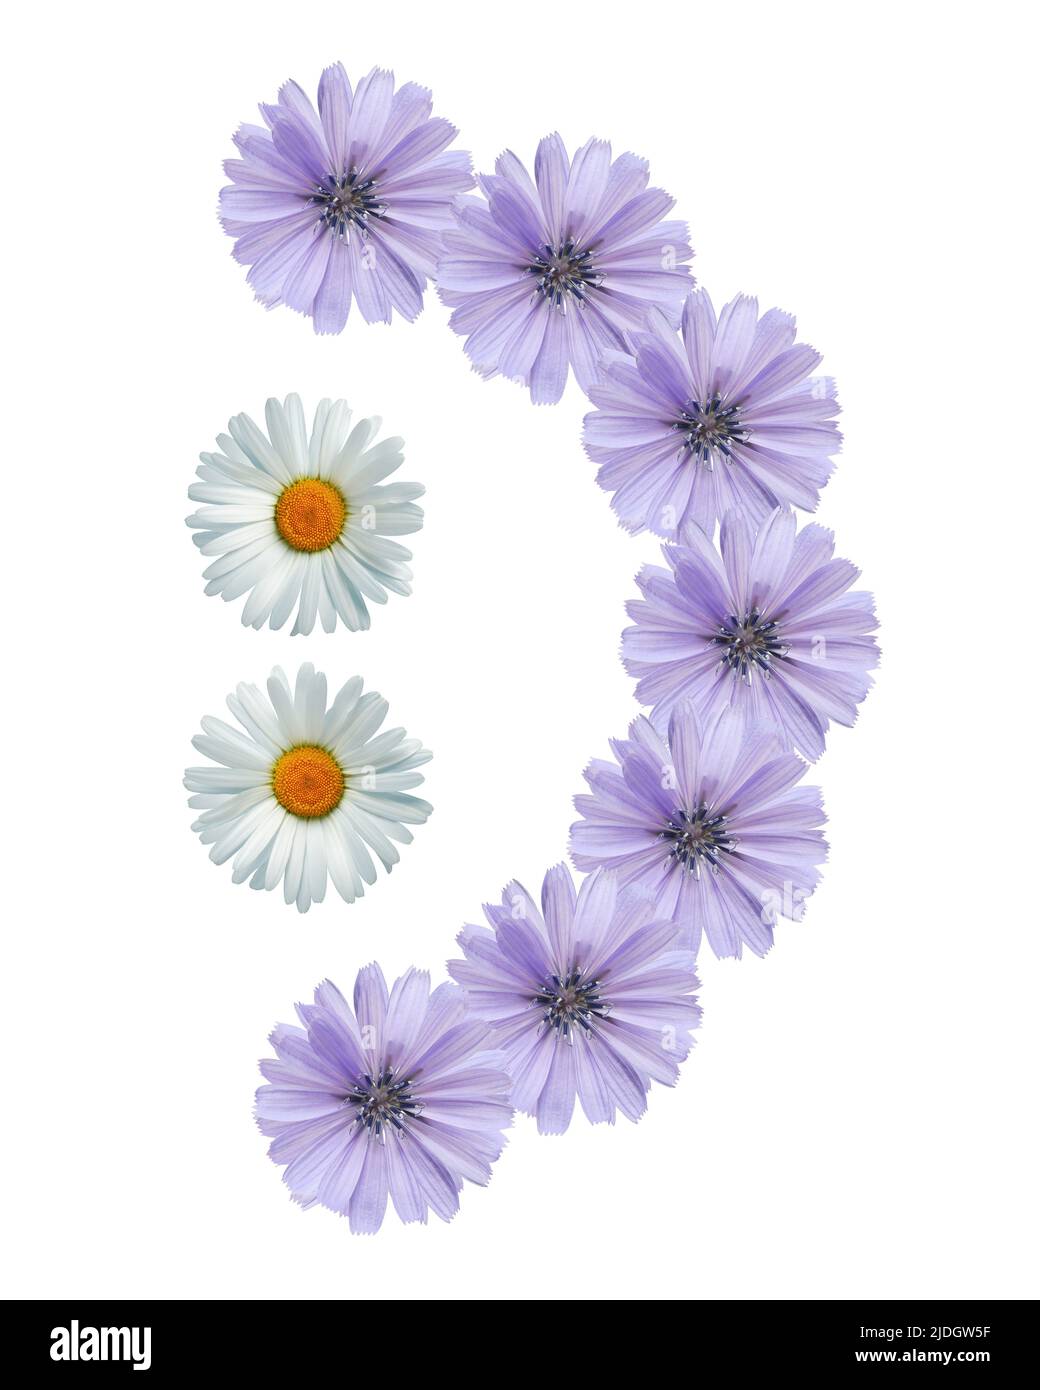 Smile icon made from blue and white daisy flowers on white background Stock Photo